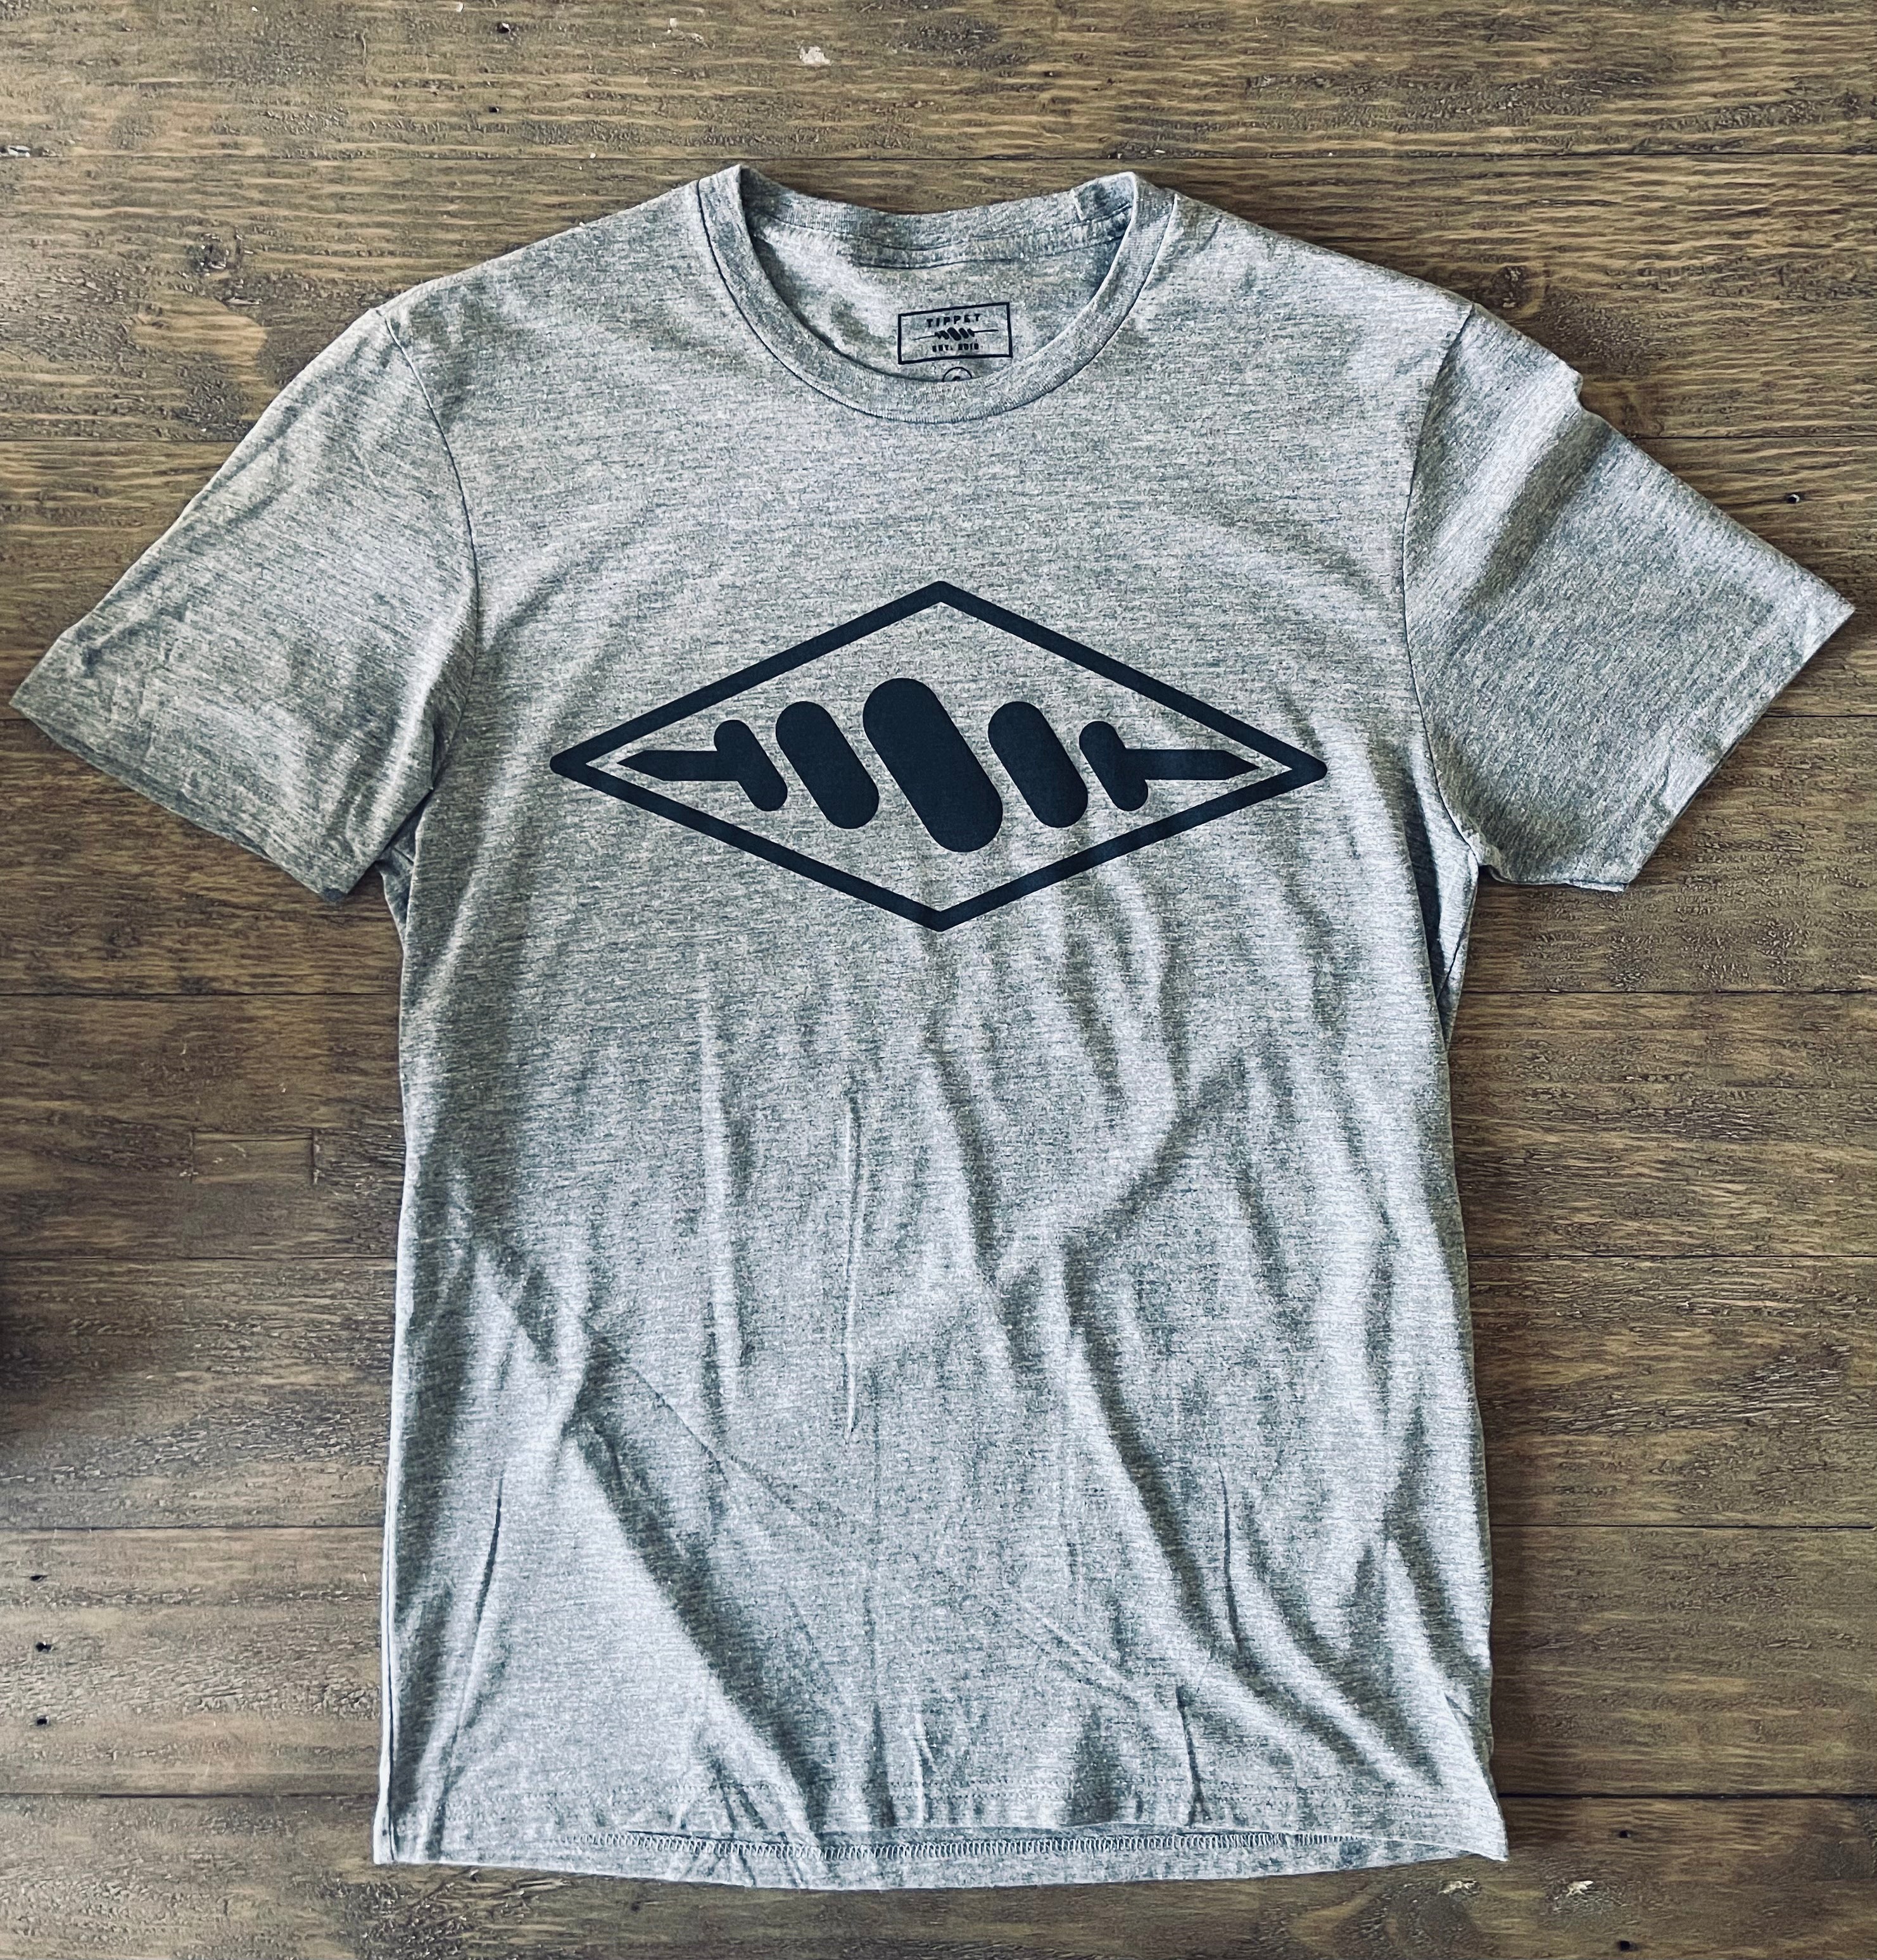 The Tippet Soft Tee